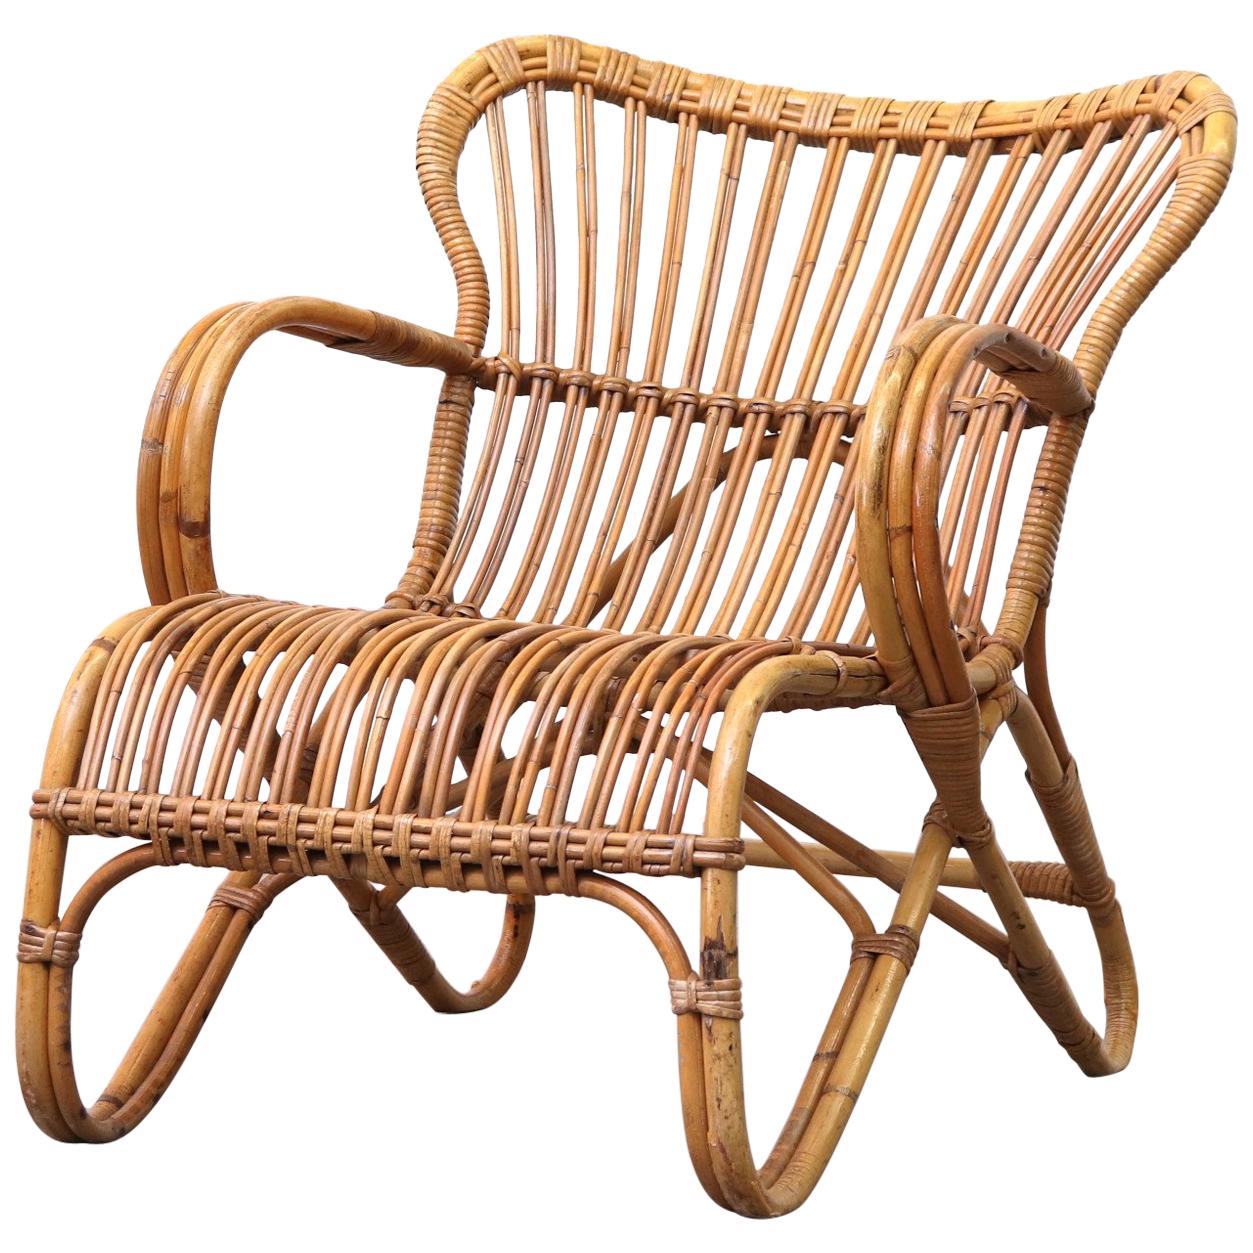 Low Midcentury Bamboo Rattan Lounge Chair